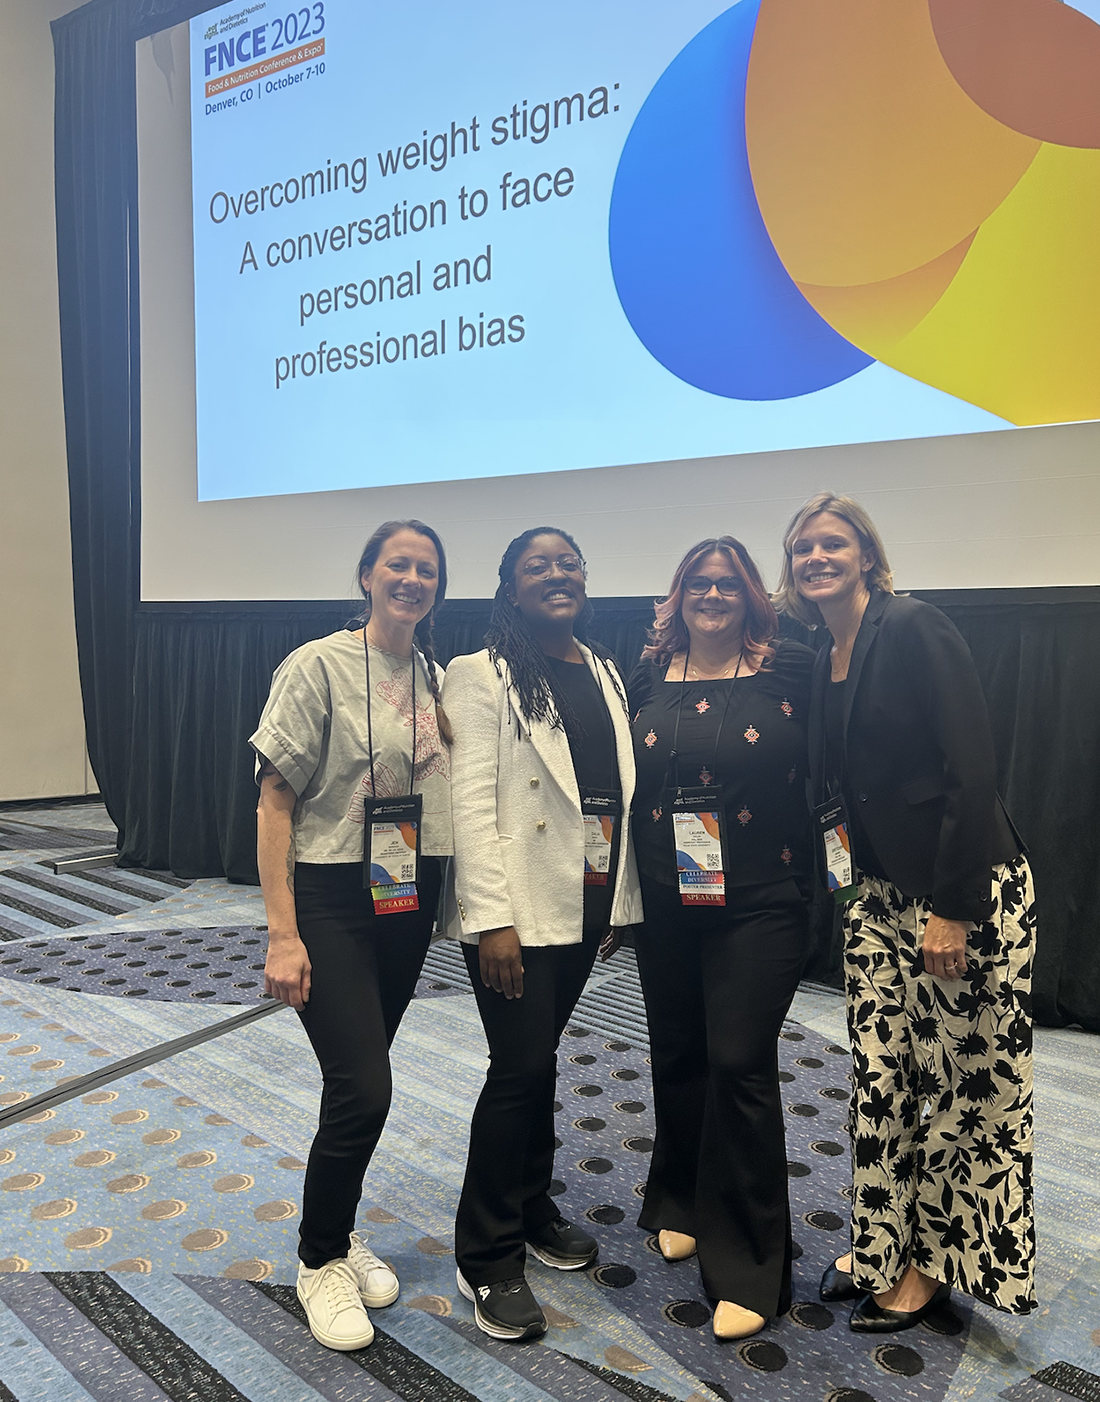 Gretchen George and co-presenters at FNCE meeting